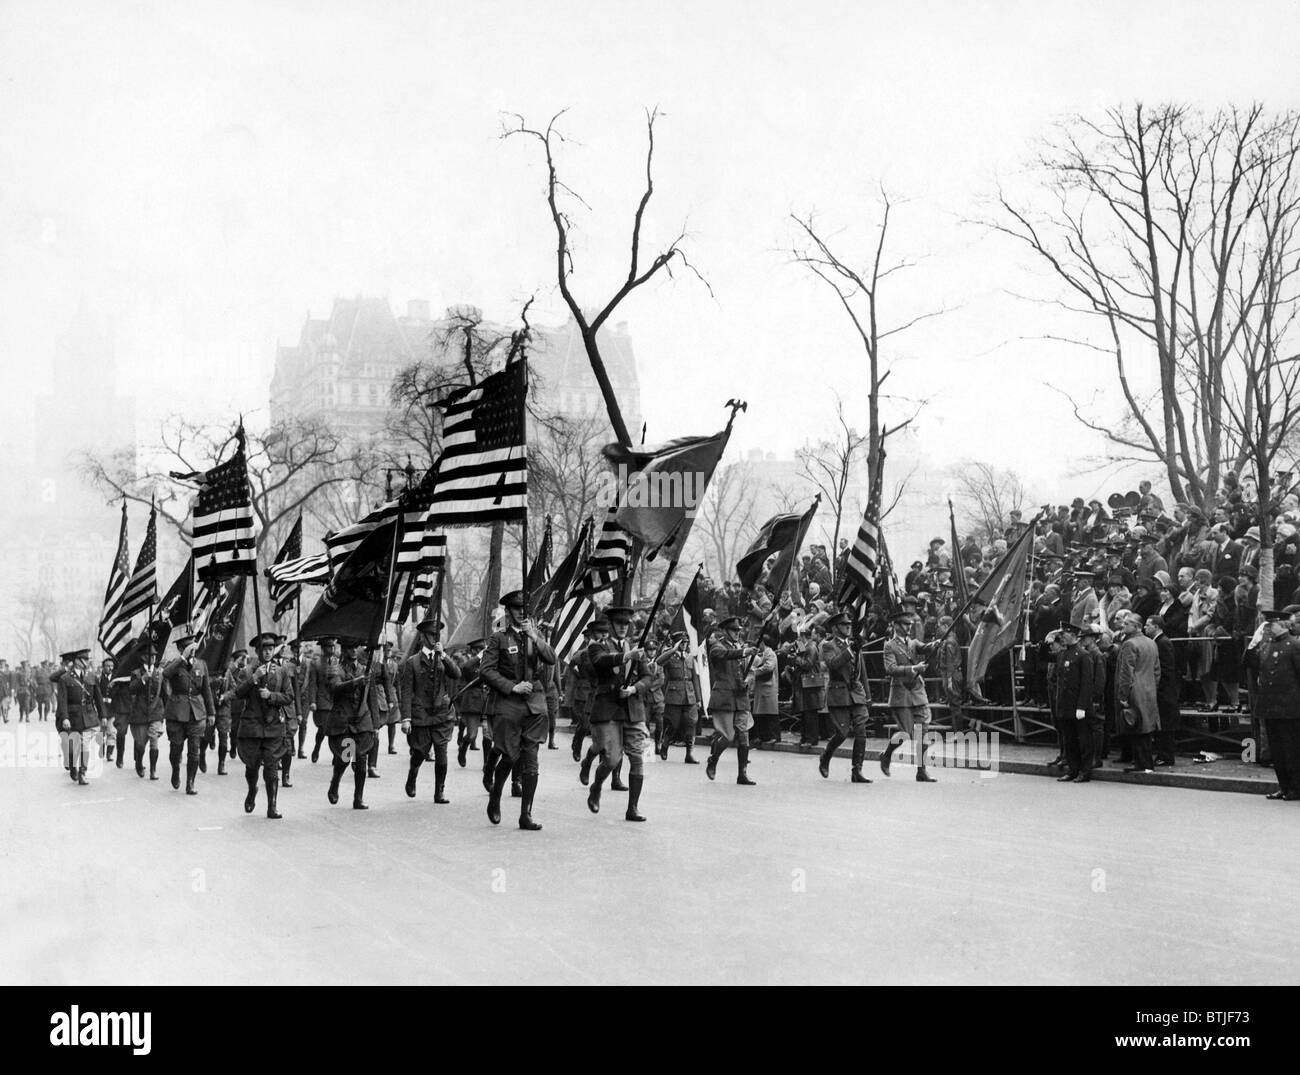 New york city memorial day parade Black and White Stock Photos & Images ...